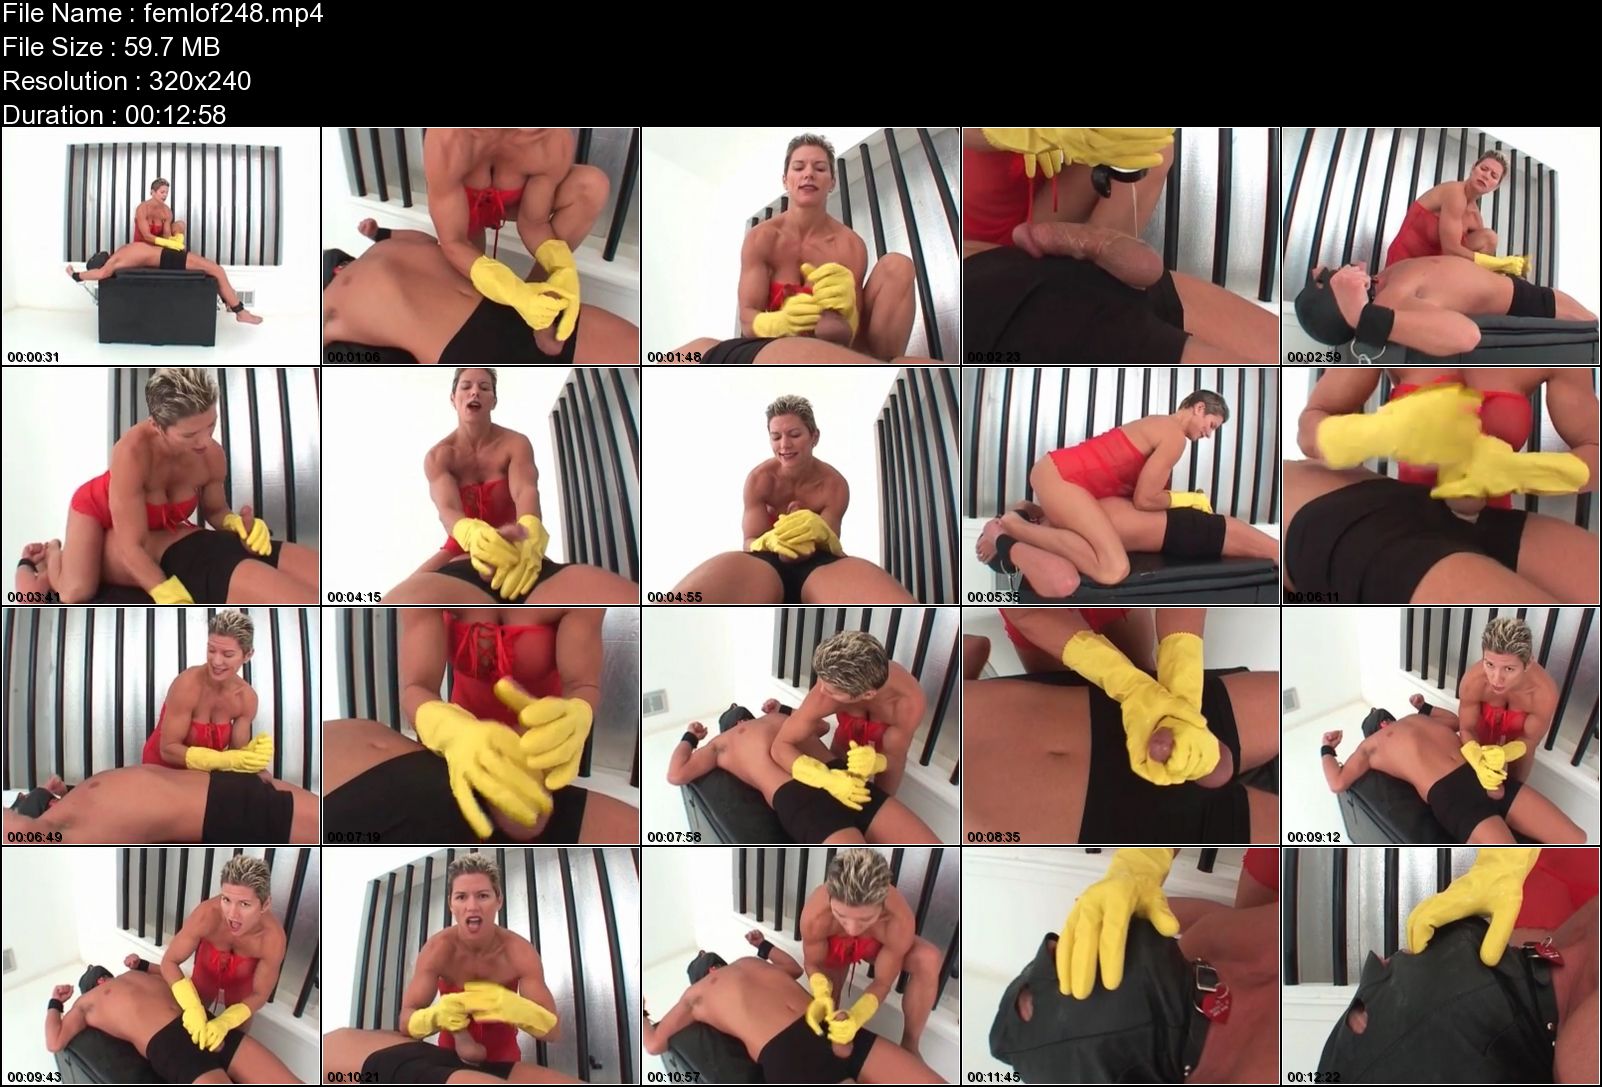 Mistress In Scene: Cock milking from Amazon blonde Mistress while wearing rubber gloves - FEMDOMLOFT - LQ/240p/MP4